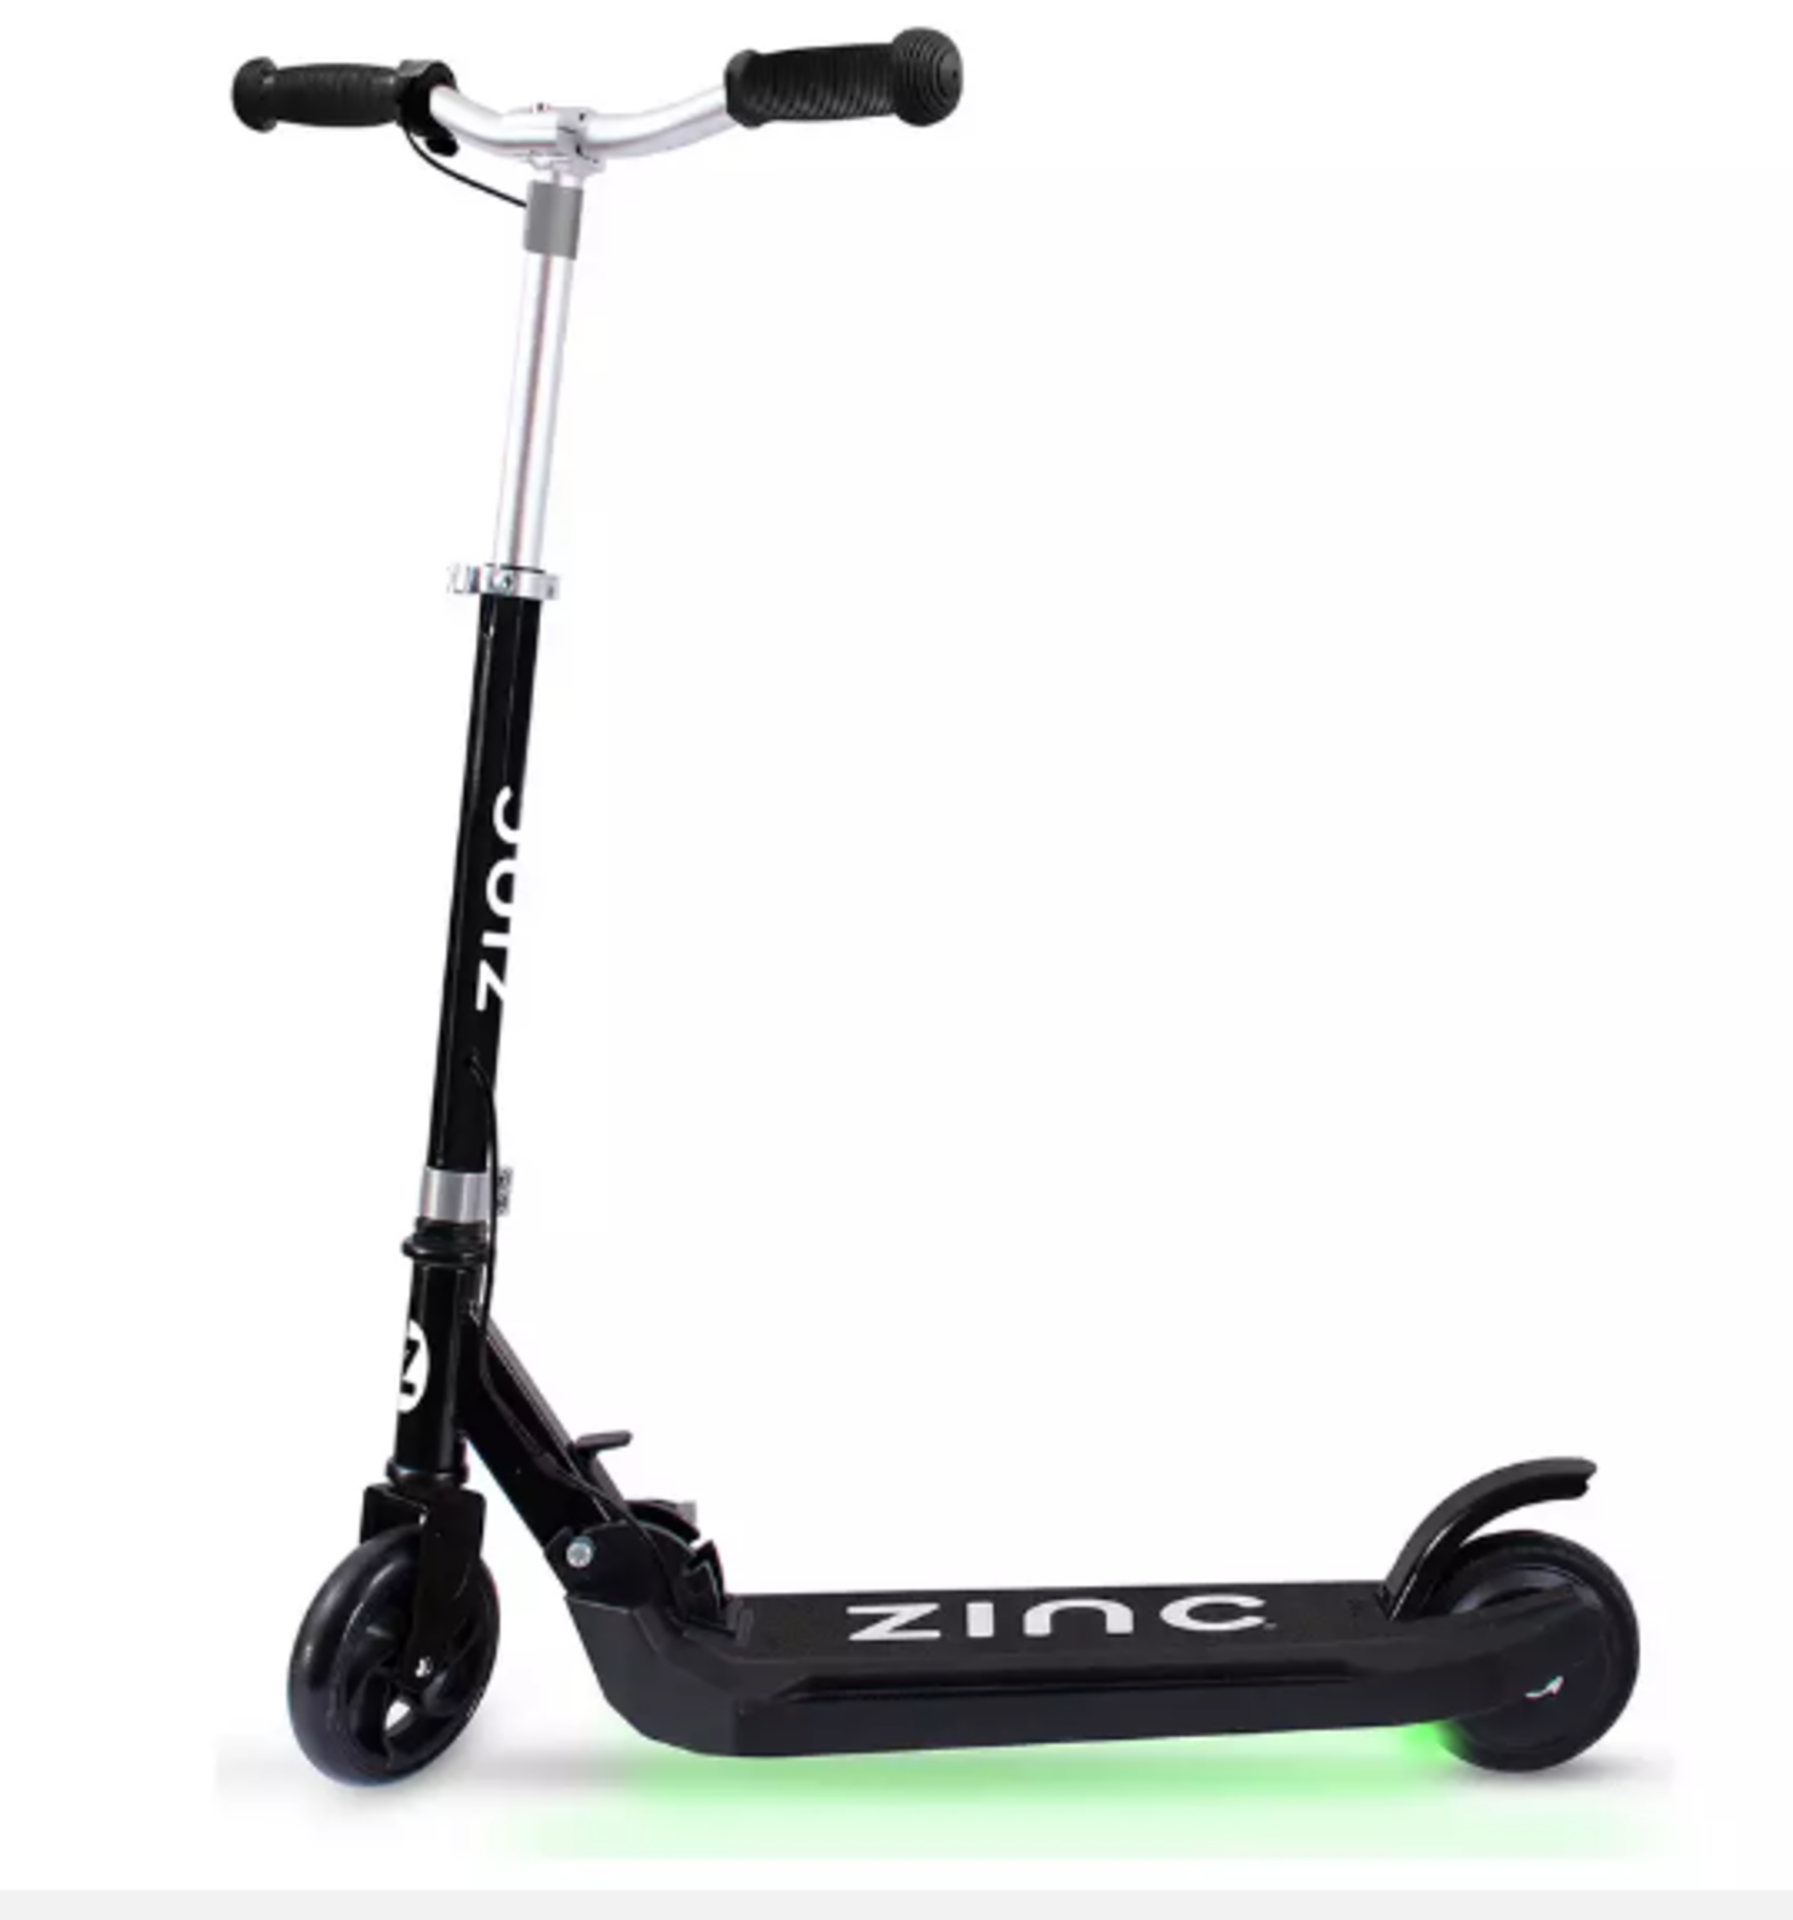 Zinc Folding Light Up Electric E5 Scooter. RRP £195.00. There is tons of fun to be had with the Zinc